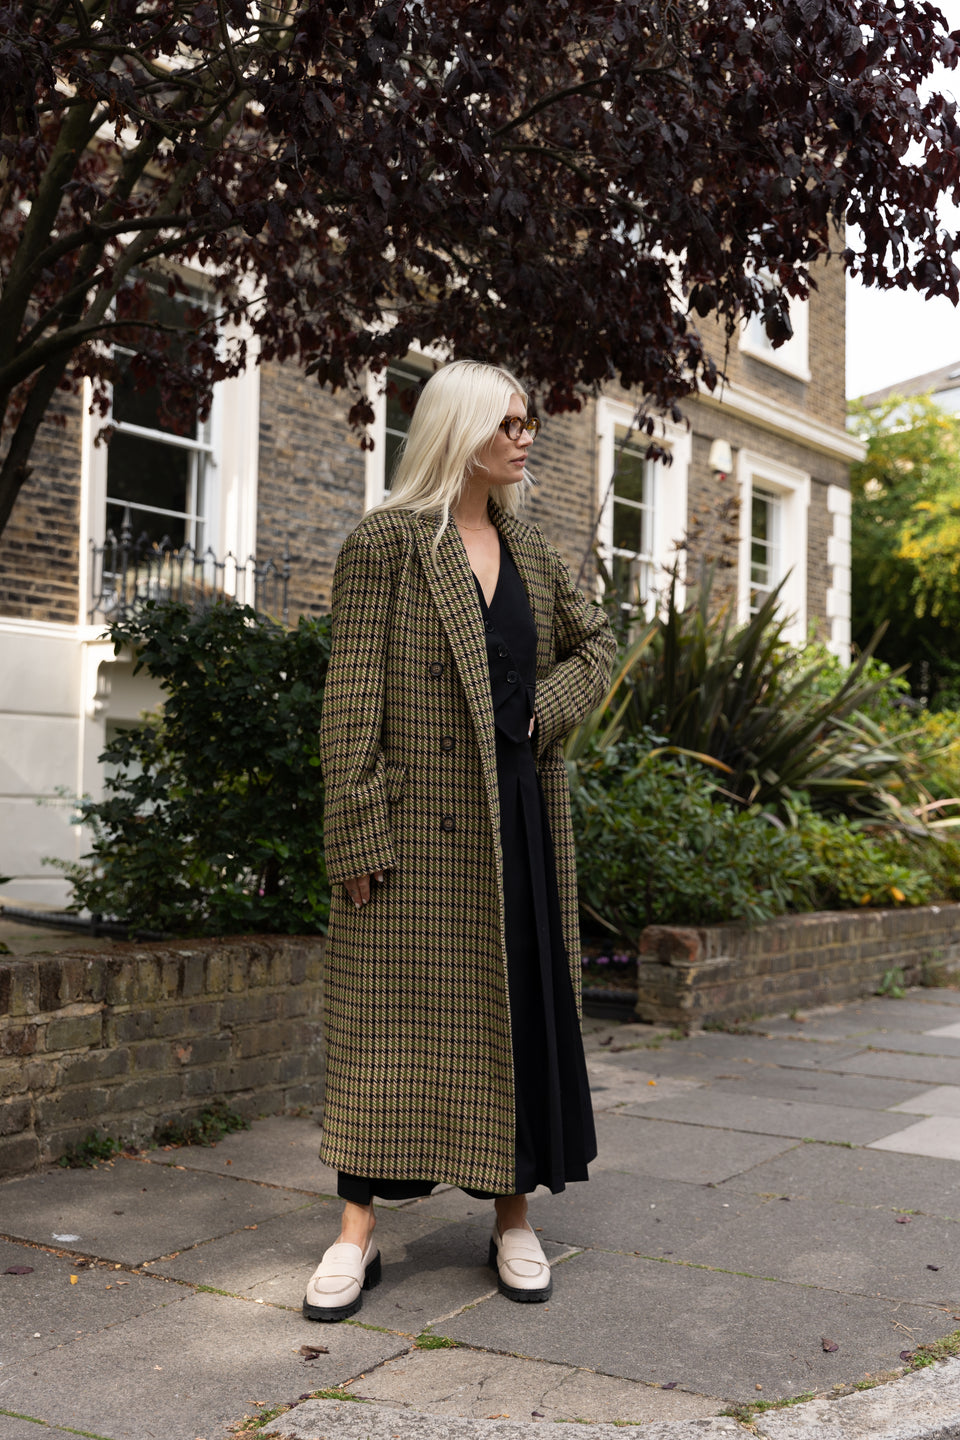 Trending Winter Coats 2023 2024 - Aligne Kennedy coat is Finished in a striking heritage check pattern that features shades of green and brown, it's a statement-making piece that'll add a touch of colour to any outfit. Wear with jeans and a turtleneck for a casual, refined look, or pair with a dress and boots for an elevated take.  Designed for a slightly relaxed, contemporary fit